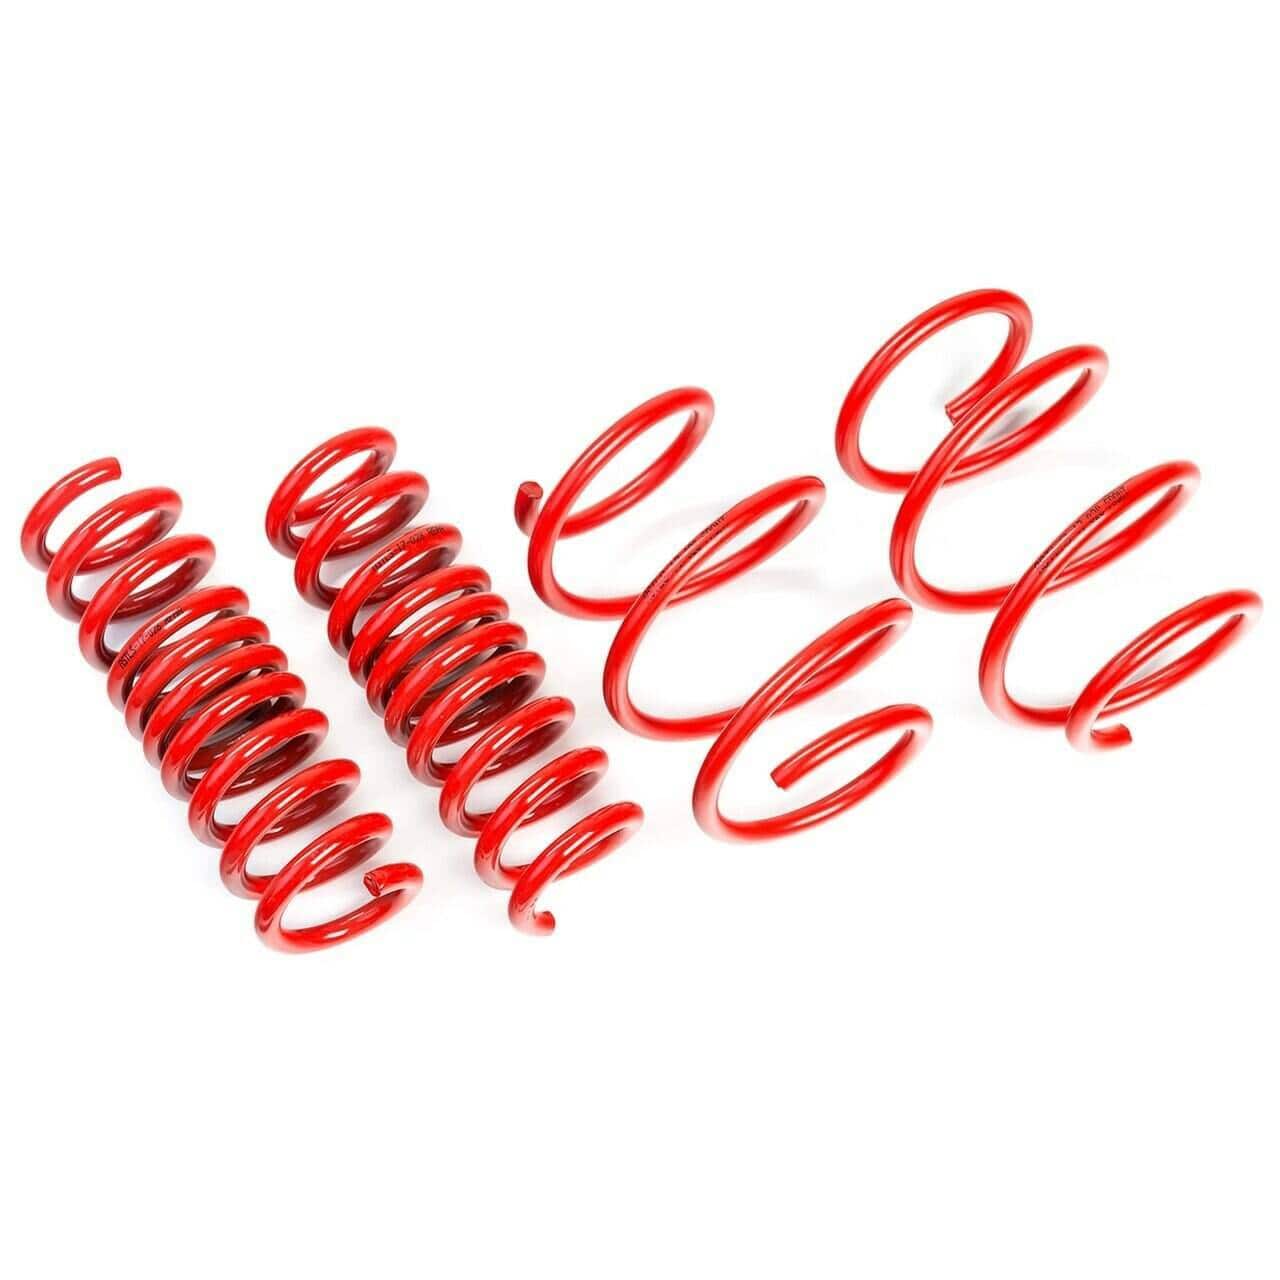 AST Suspension Lowering Springs (20MM/25MM) - 2013-2019 Mercedes-Benz CLA-Class CLA 180CDi Manual Gear/CLA 180/CLA 200 Coupe (C117) ASTLS-19-069